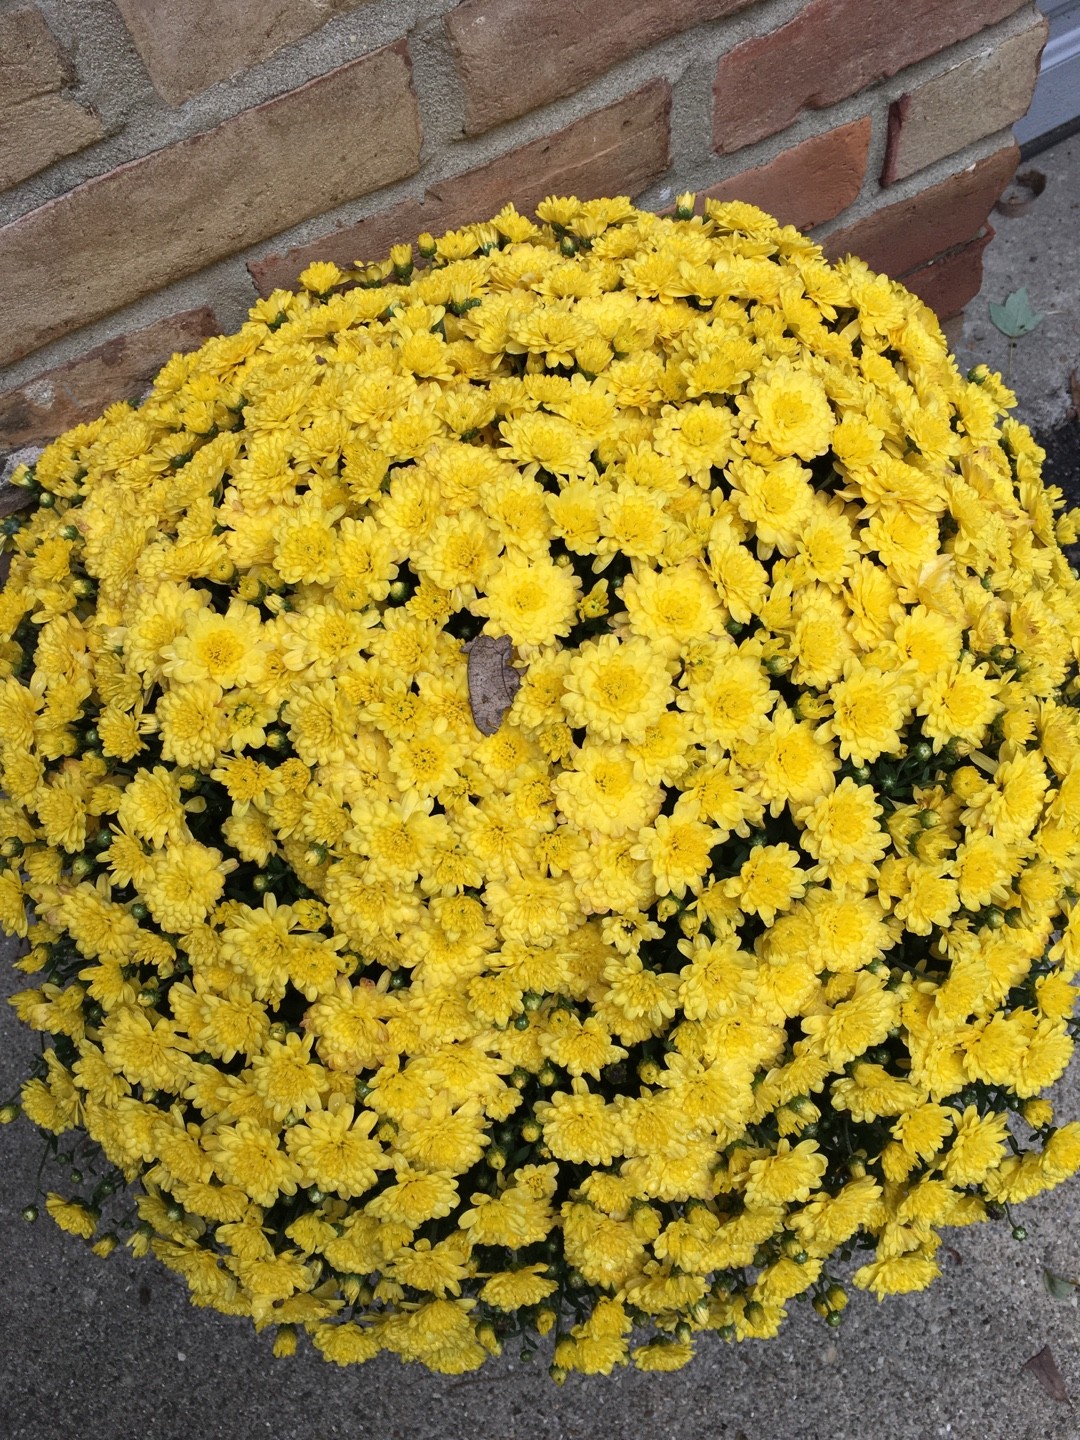 Yellow Chrysanthemum (Mums) Plant Seeds, Flower, Uses - PictureThis